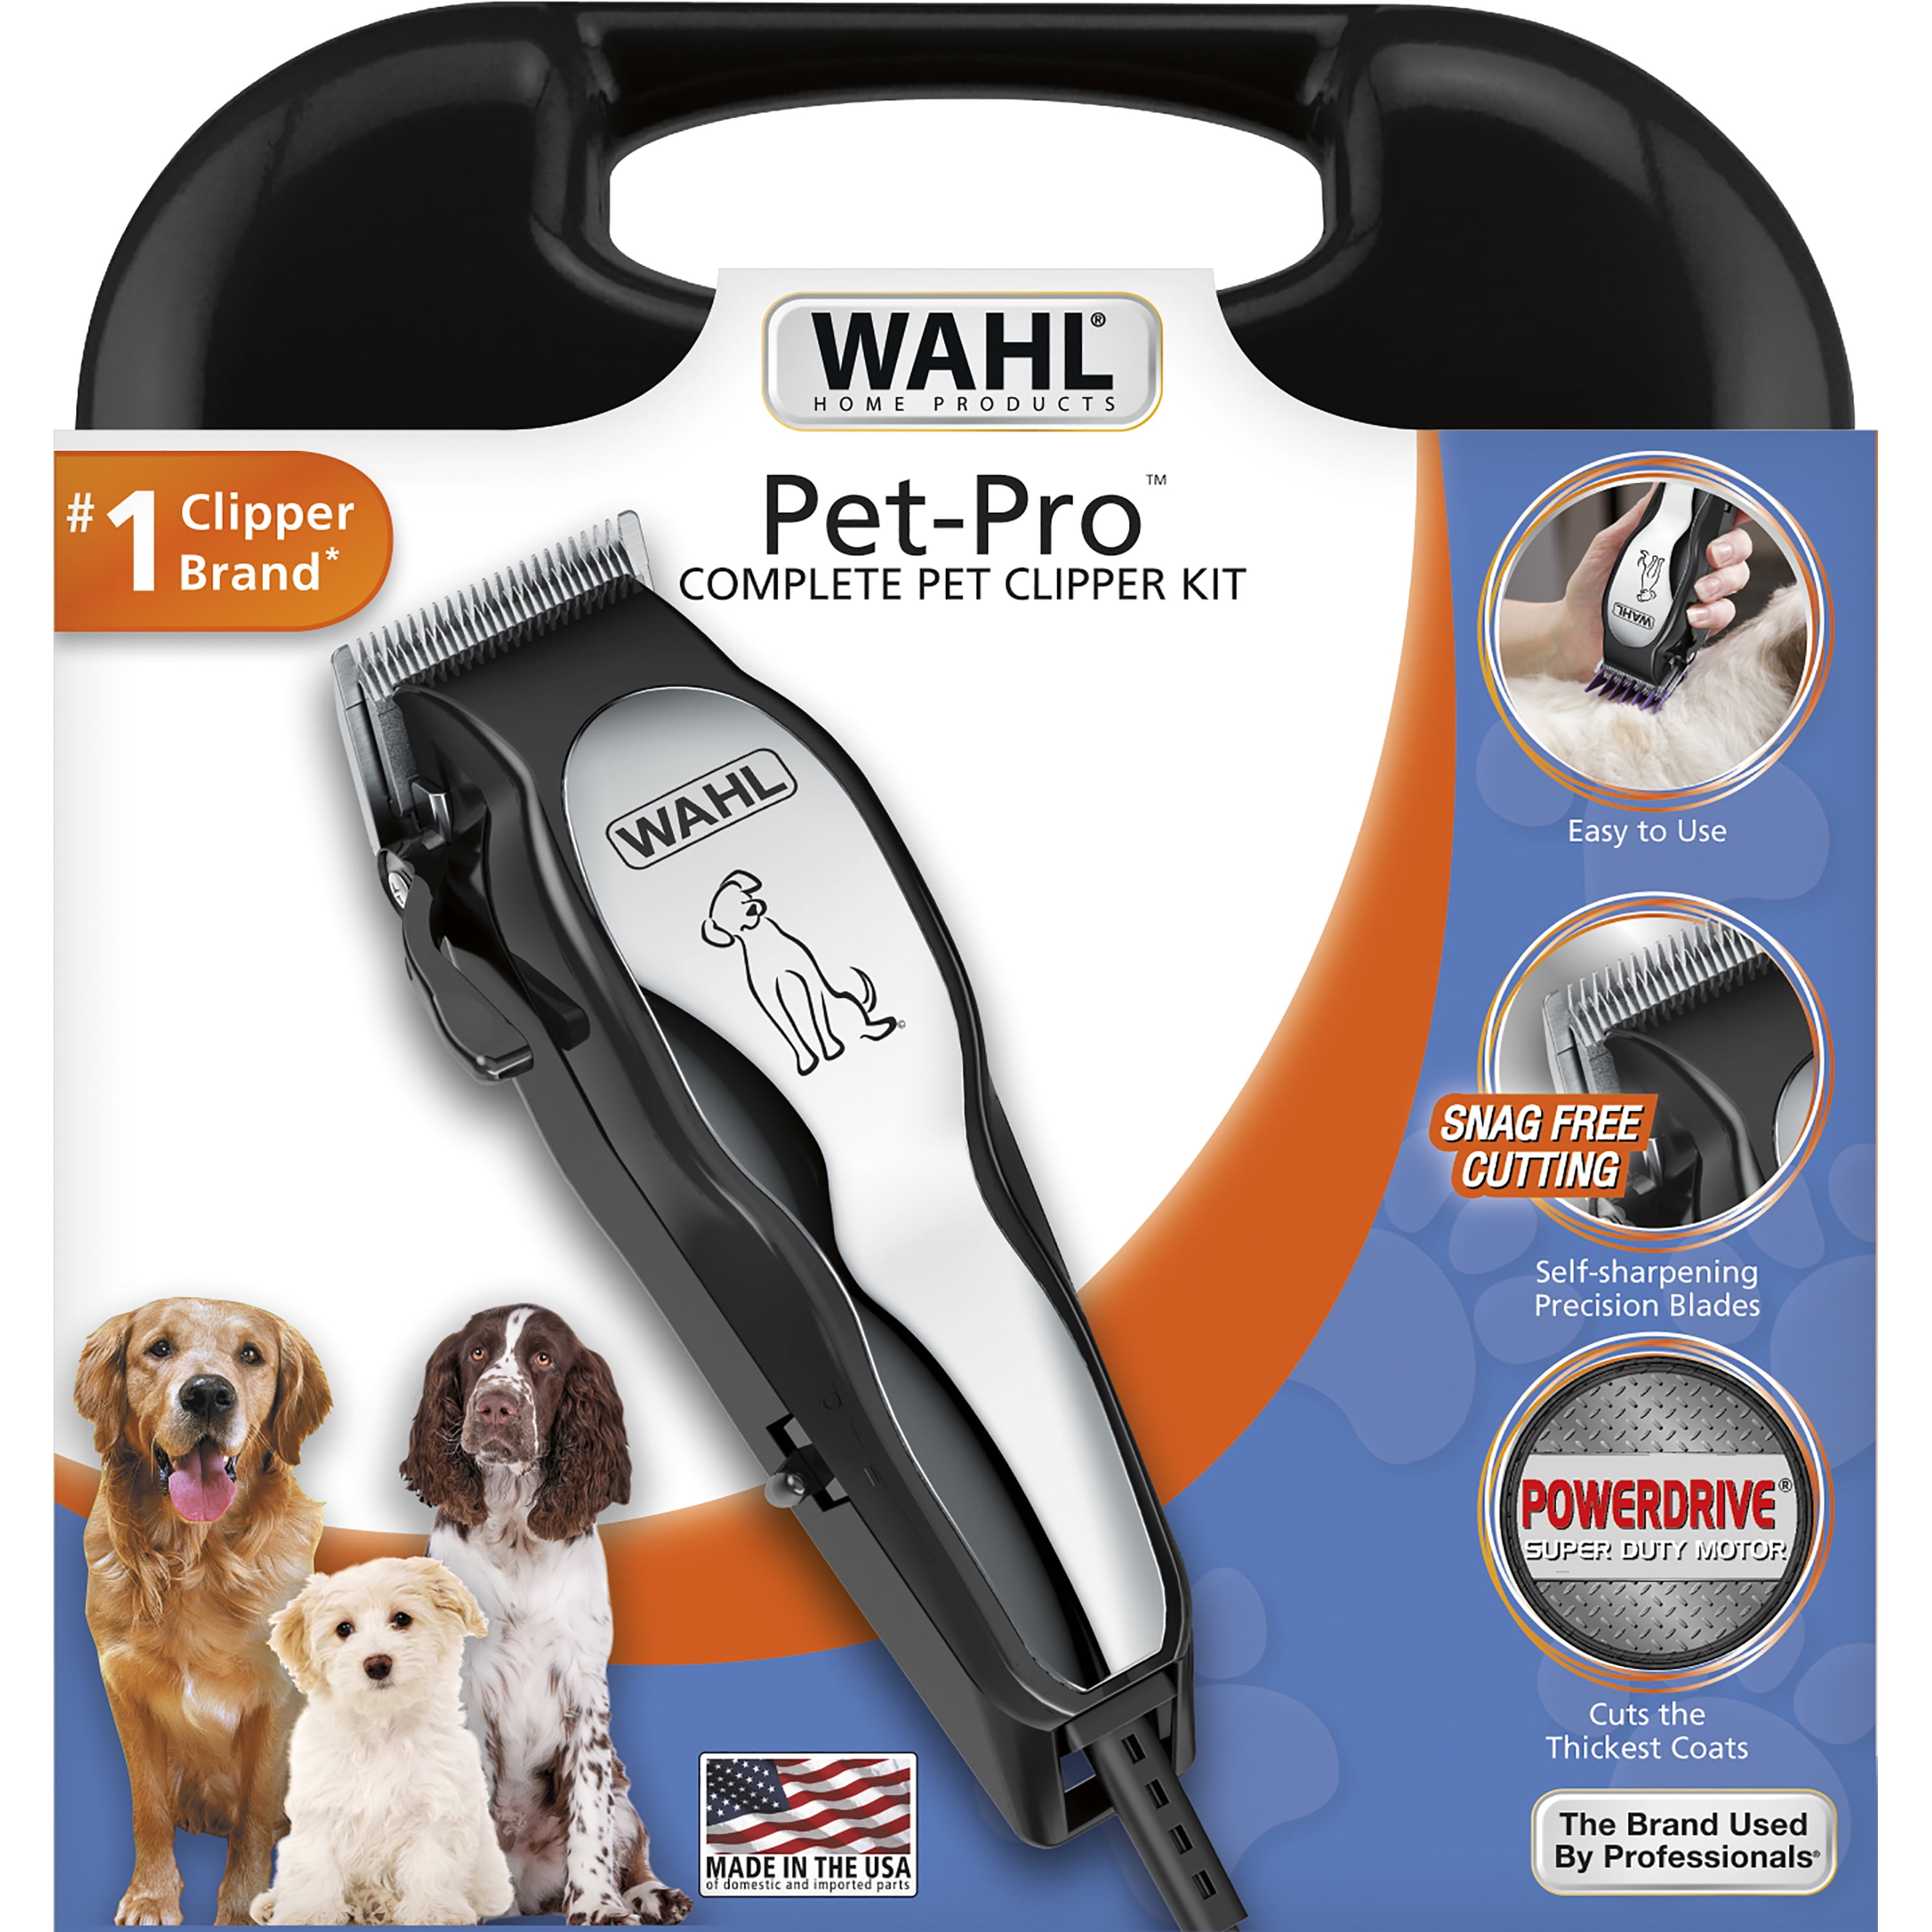 Quiet Heavy-Duty Electric Dog Clipper for Dogs & Cats with Thick & Heavy Coats Model 9281-210 Wahl Clipper Pet-Pro Dog Grooming Kit 